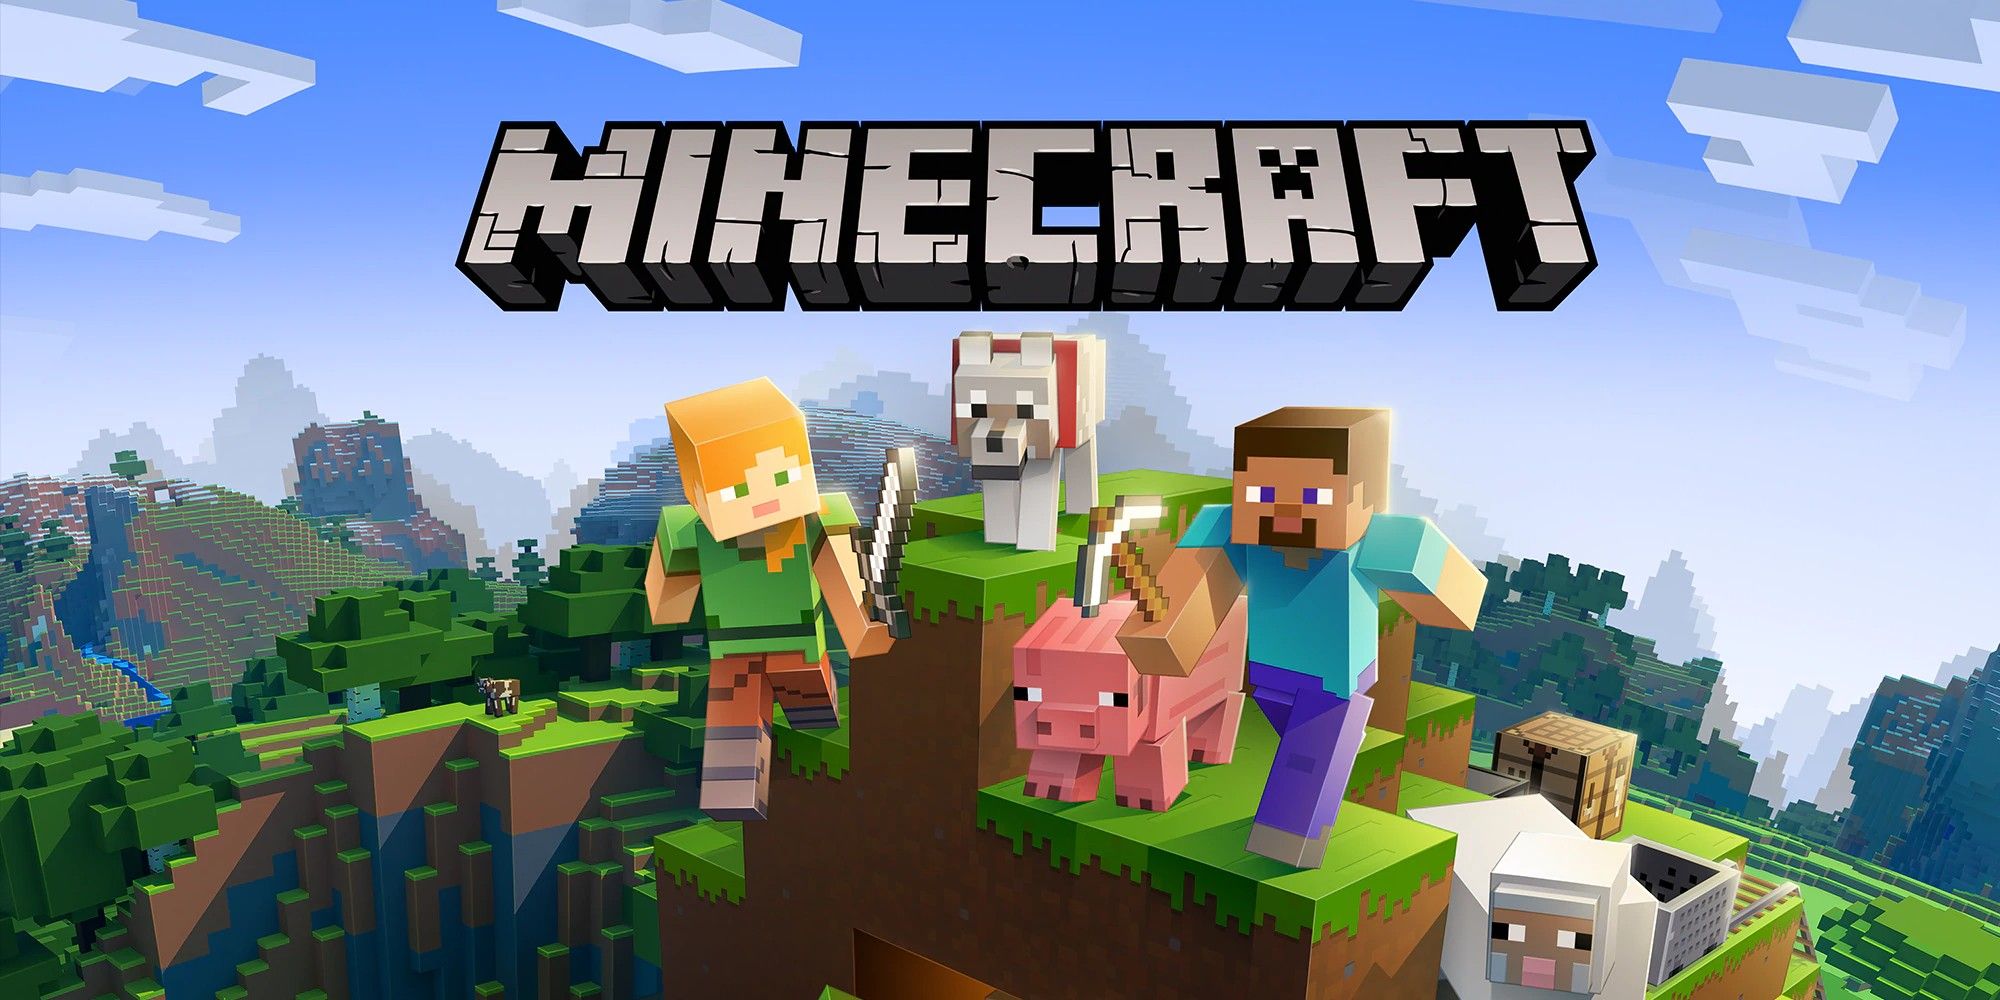 Minecraft cover art with players enemies and animals